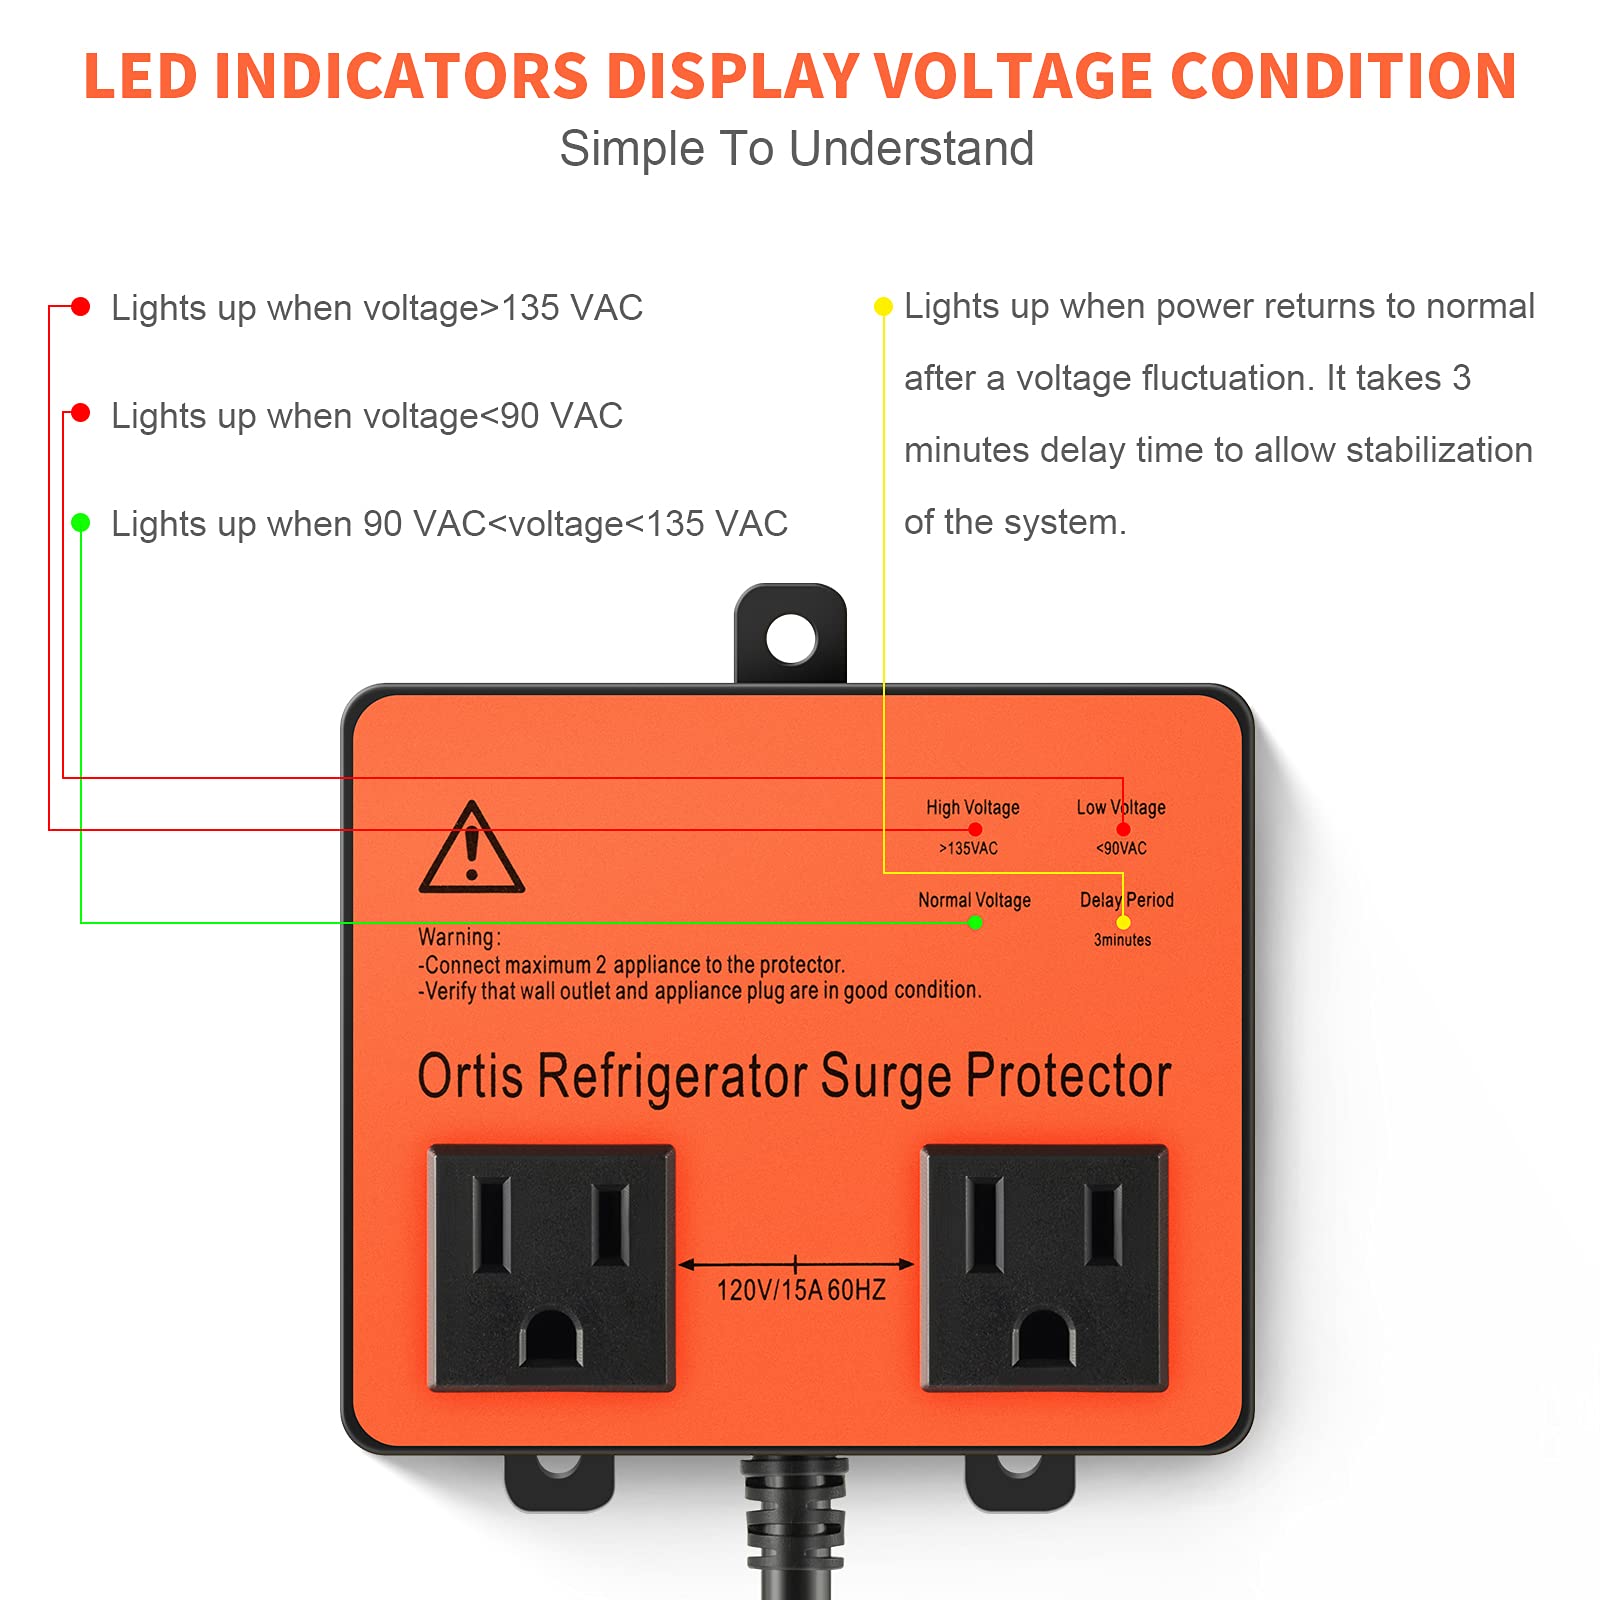 Ortis Refrigerator Surge Protector, Ortis Double Outlet Voltage Protector for Home Appliances with Time Delay, Protects Against Browno